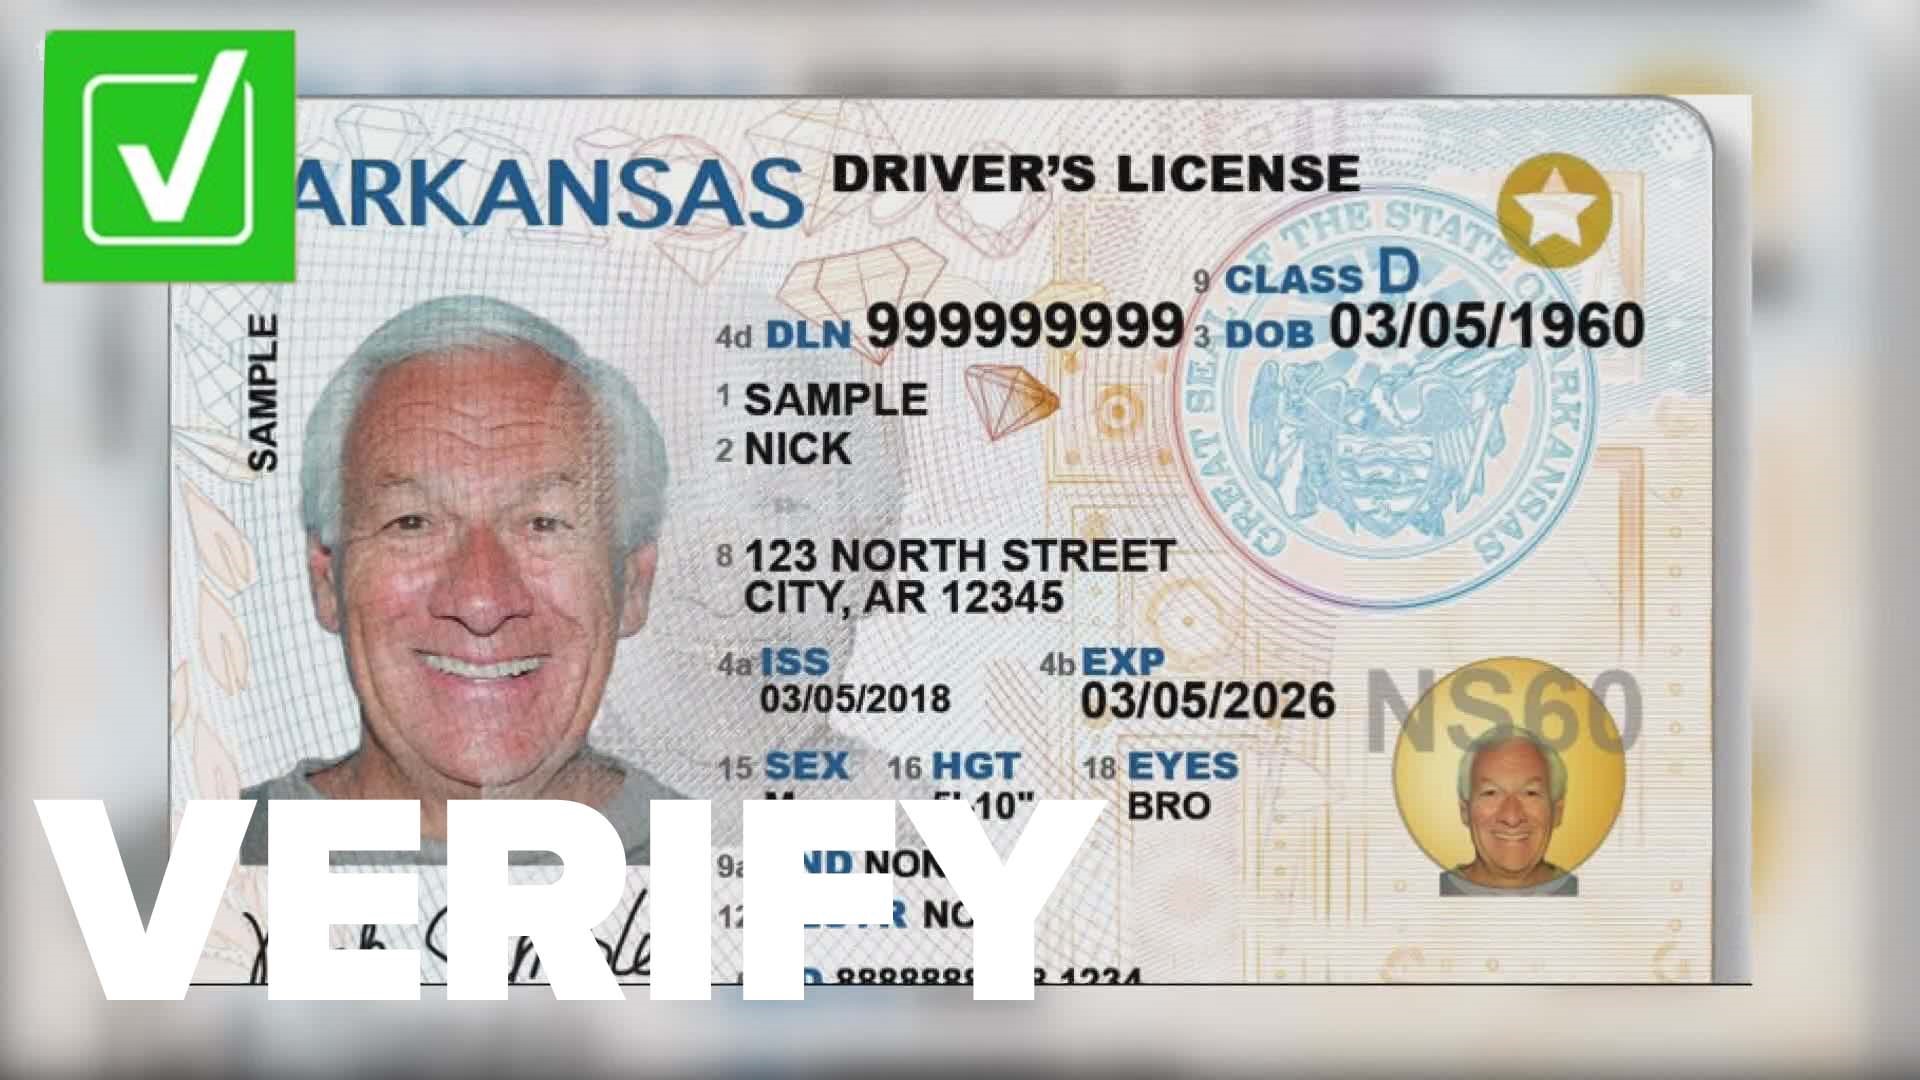 Arkansas legislators passed several laws recently, which could change the way we vote. That's resulted in questions asking, asking if you need a real ID to do so.